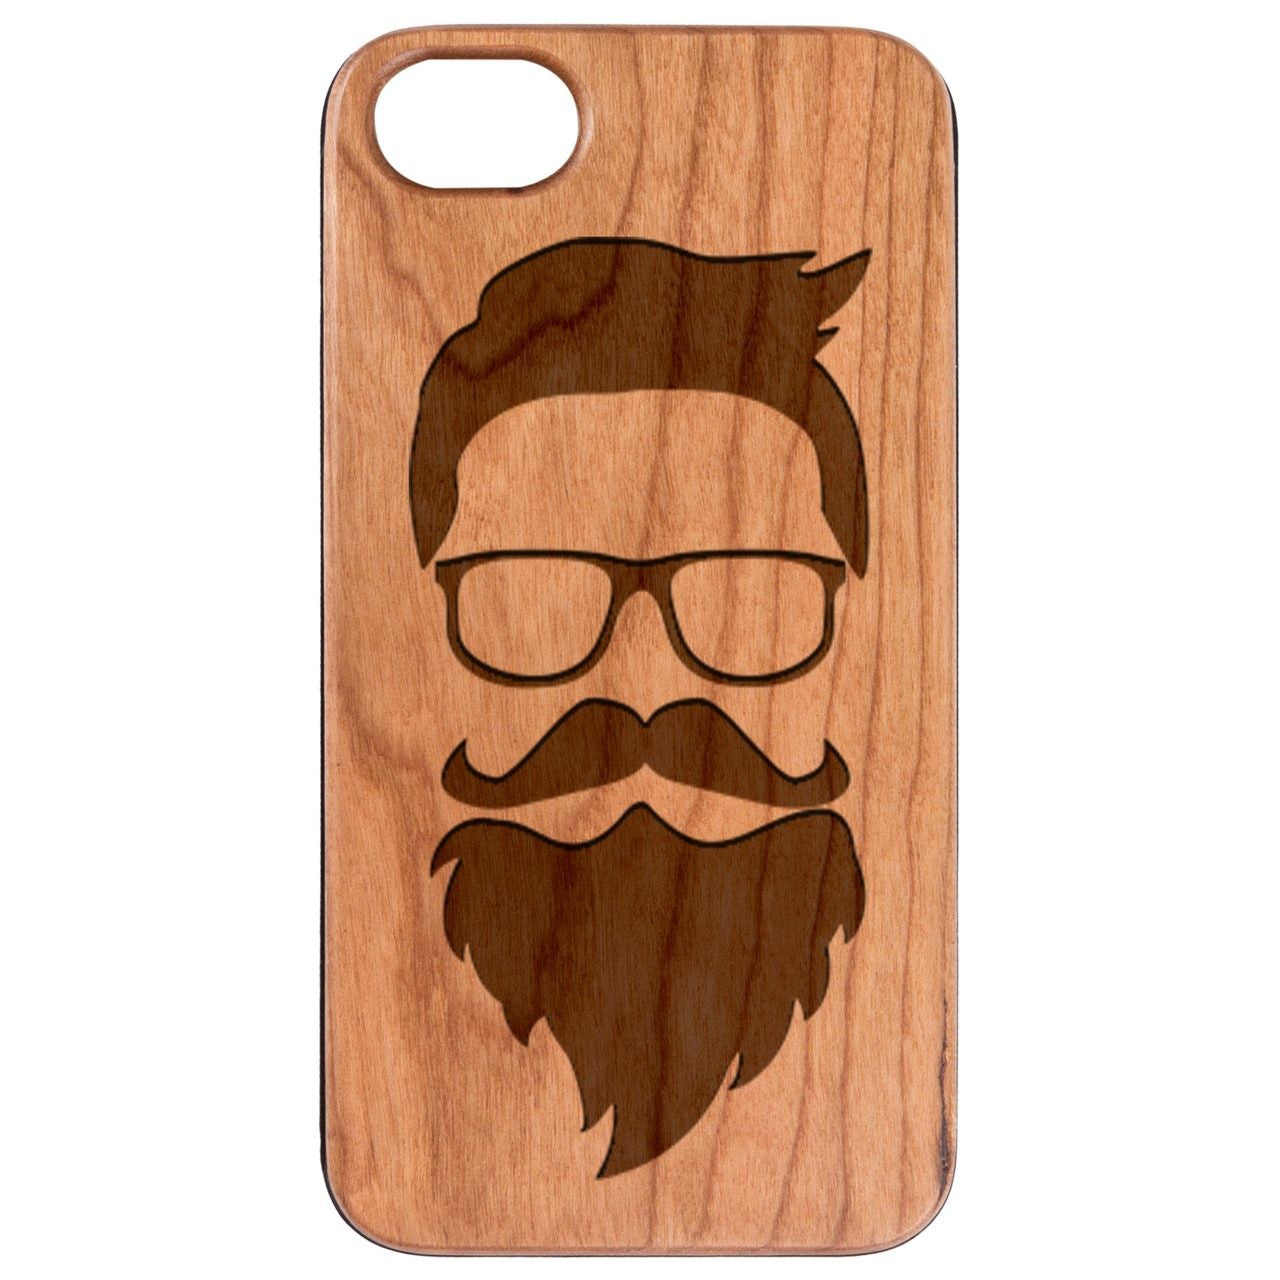  Hipster - Engraved - Wooden Phone Case - IPhone 13 Models